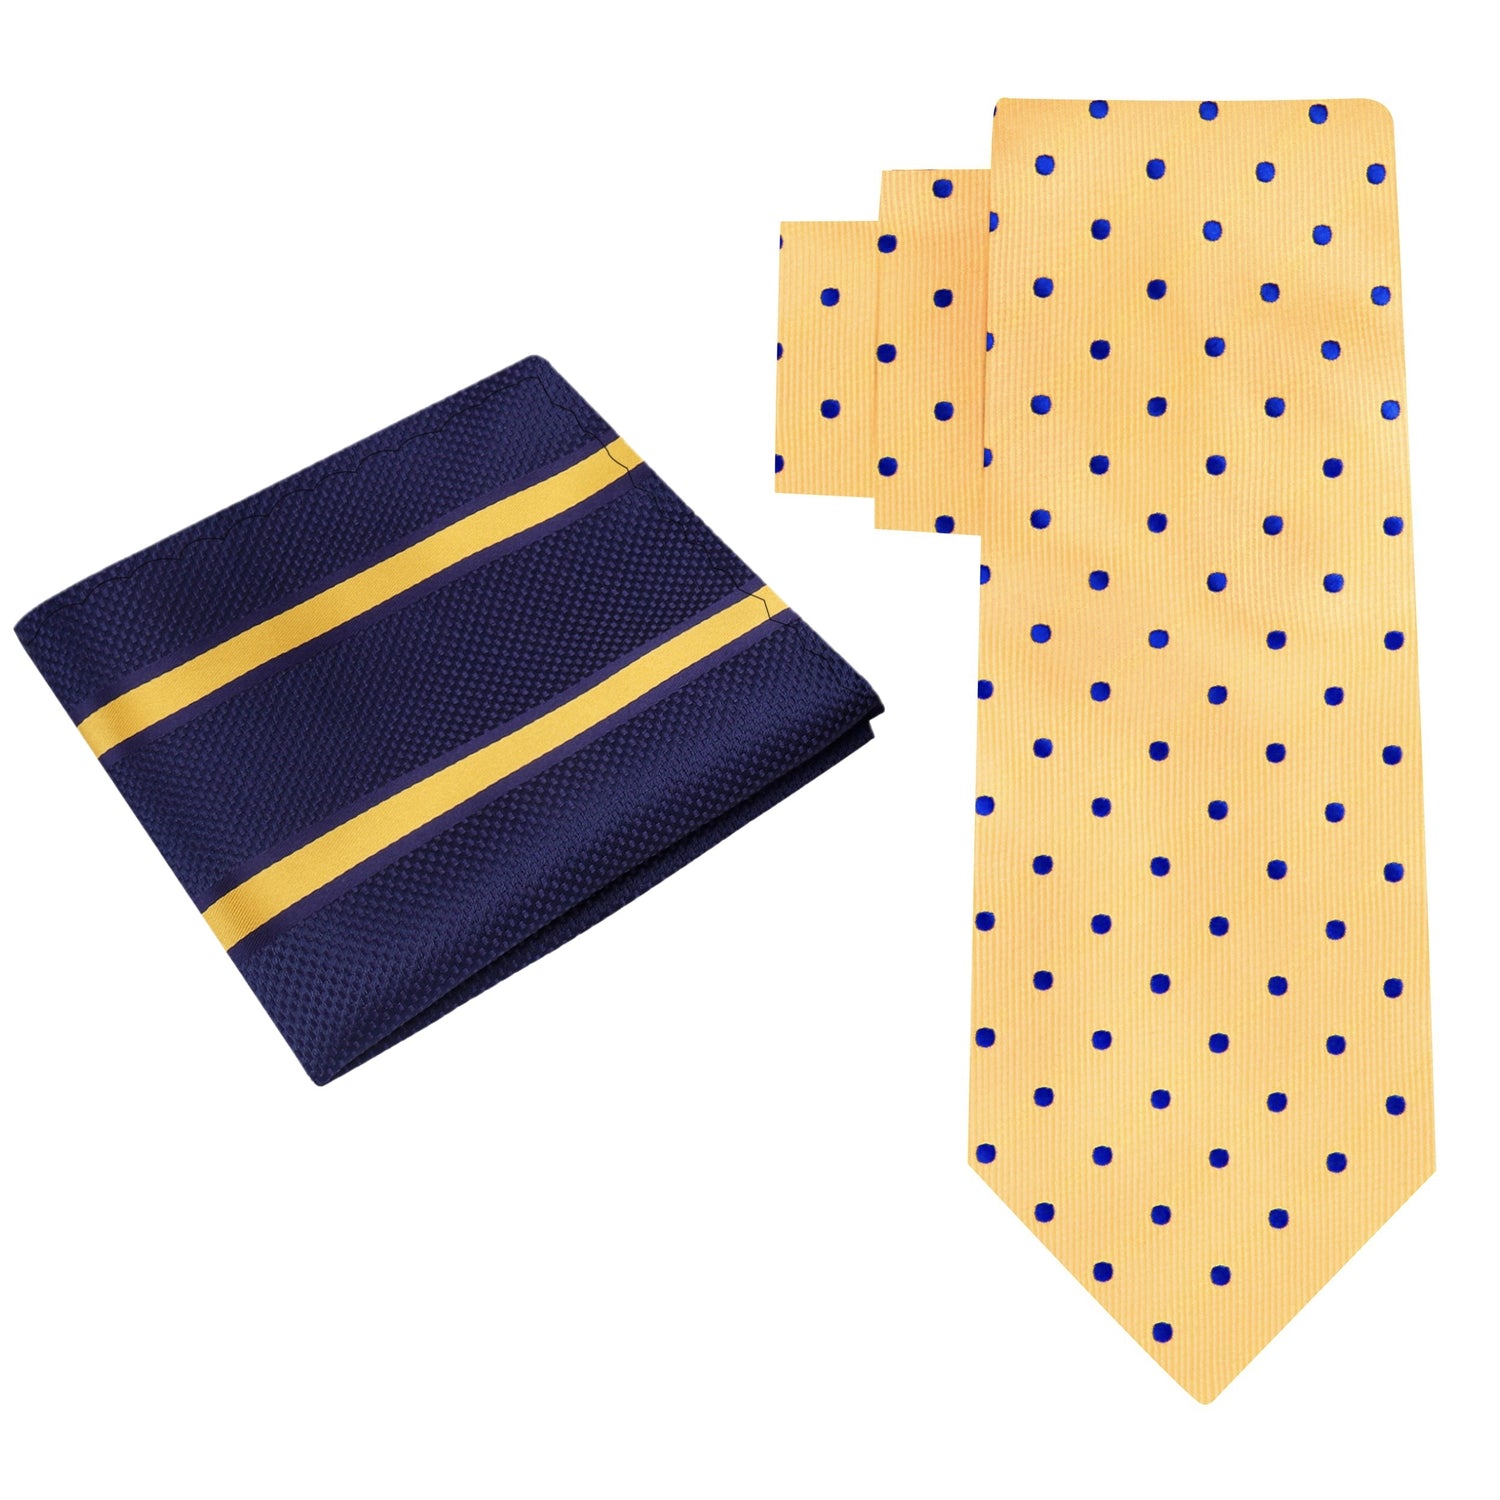 Alt View: Alt View: Yellow with Blue Dots Necktie and Blue, Yellow Stripe Square